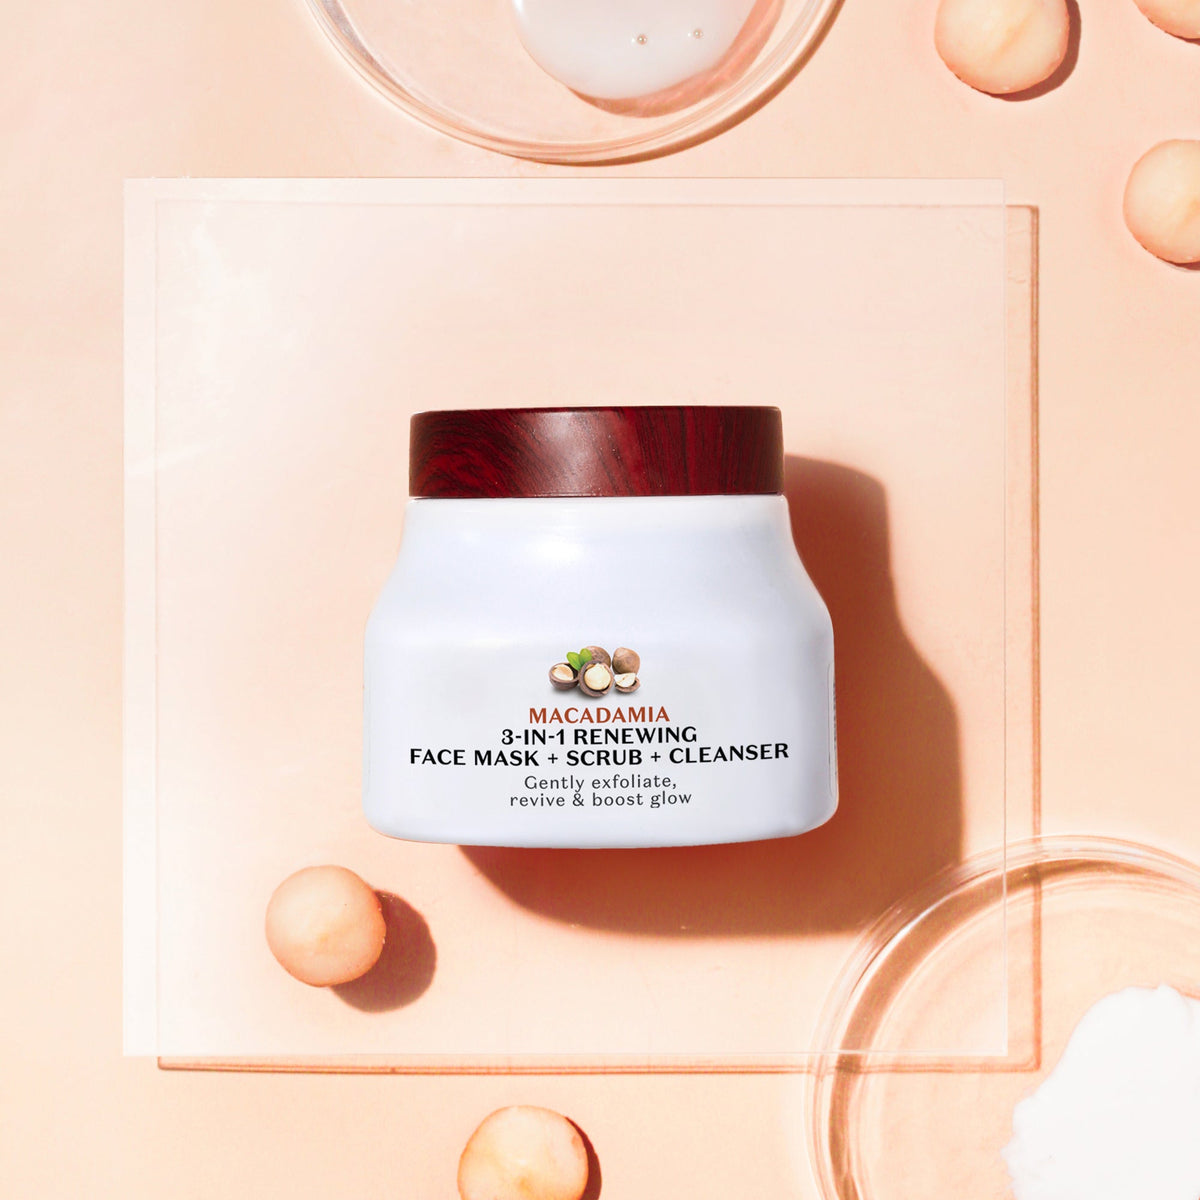 Macadamia 3 in 1 Renewing Face Mask, Scrub & Cleanser | From the makers of Parachute Advansed | 140ml